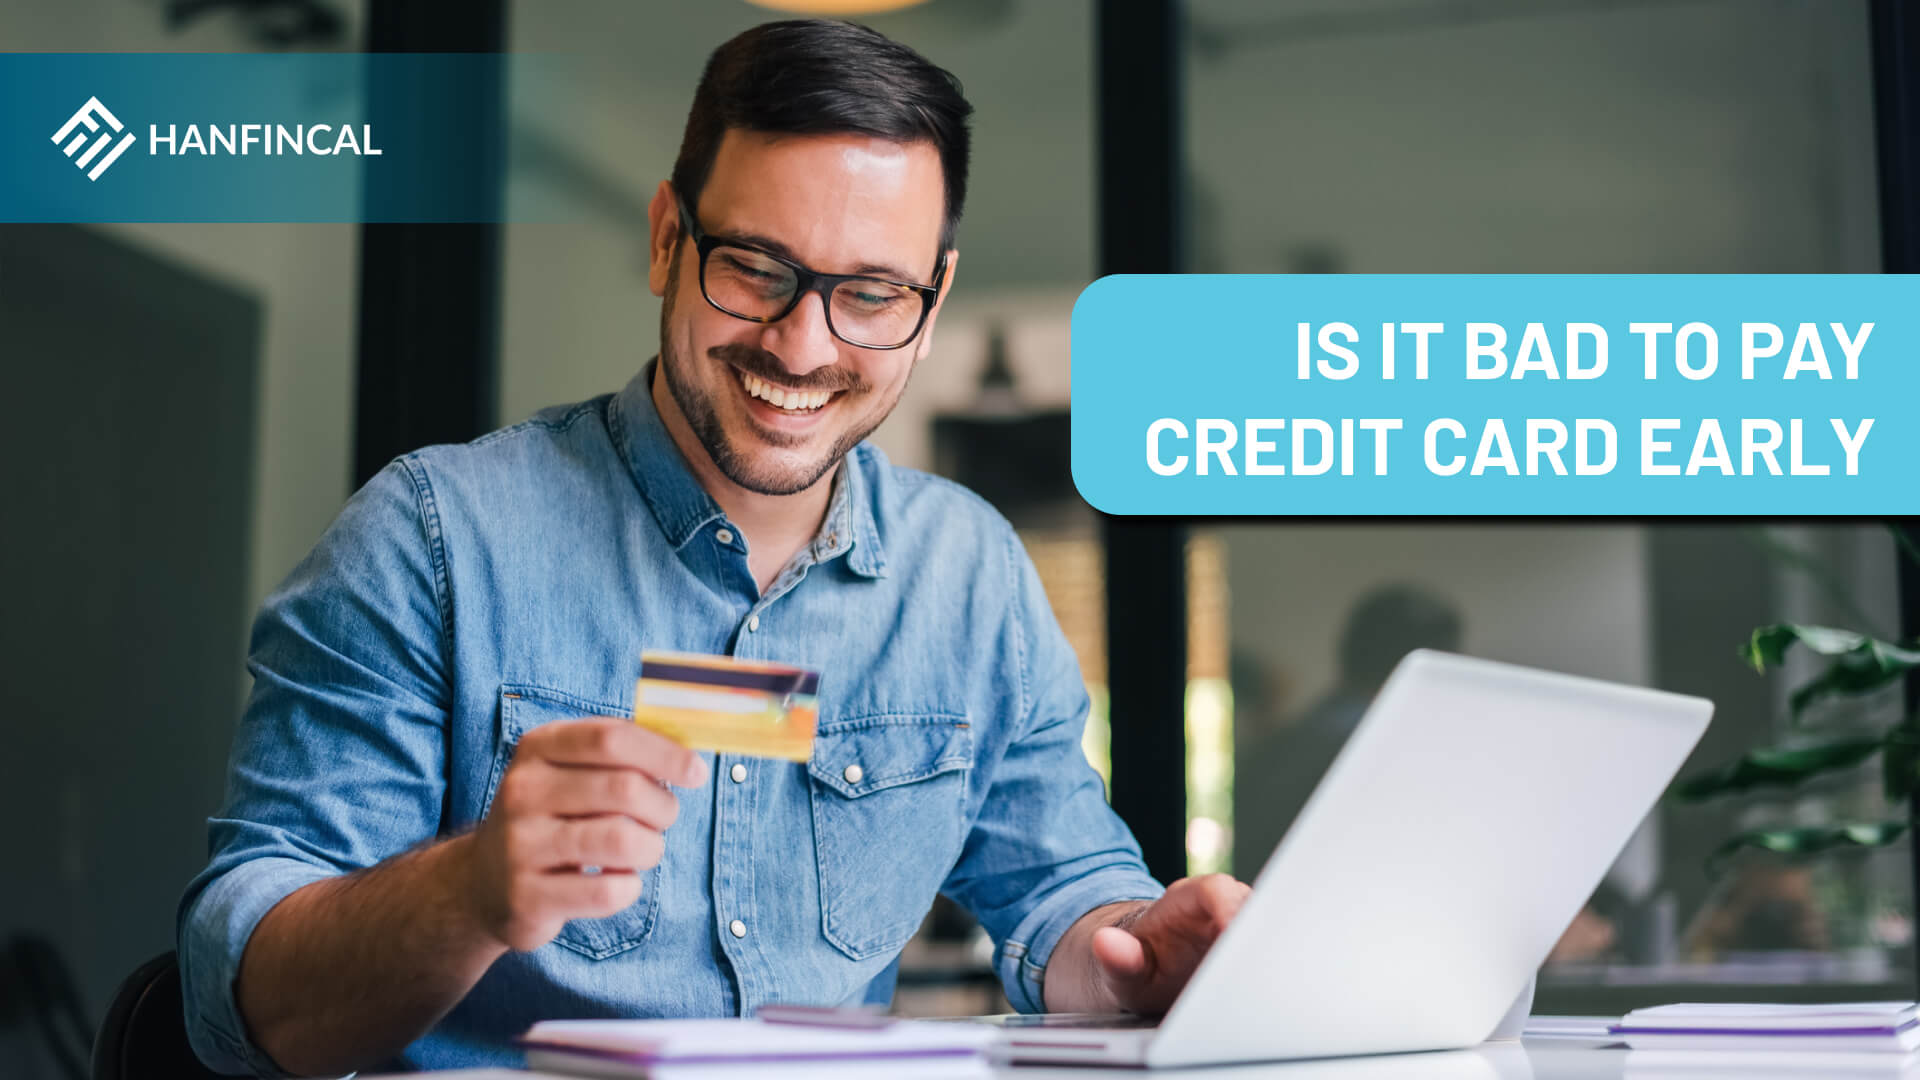 Is it bad to pay credit cards early?